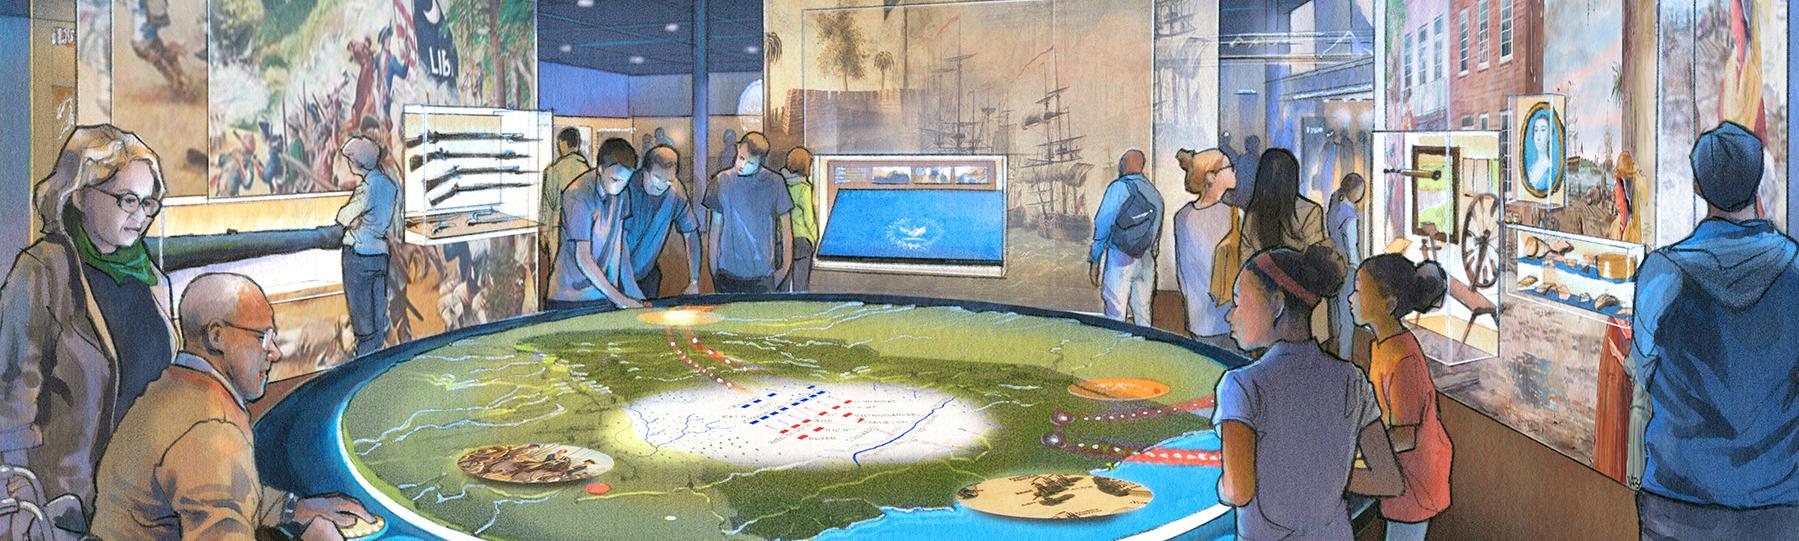 Colorful drawing depicts guest around a projection table showing a map of revolutionary war battles